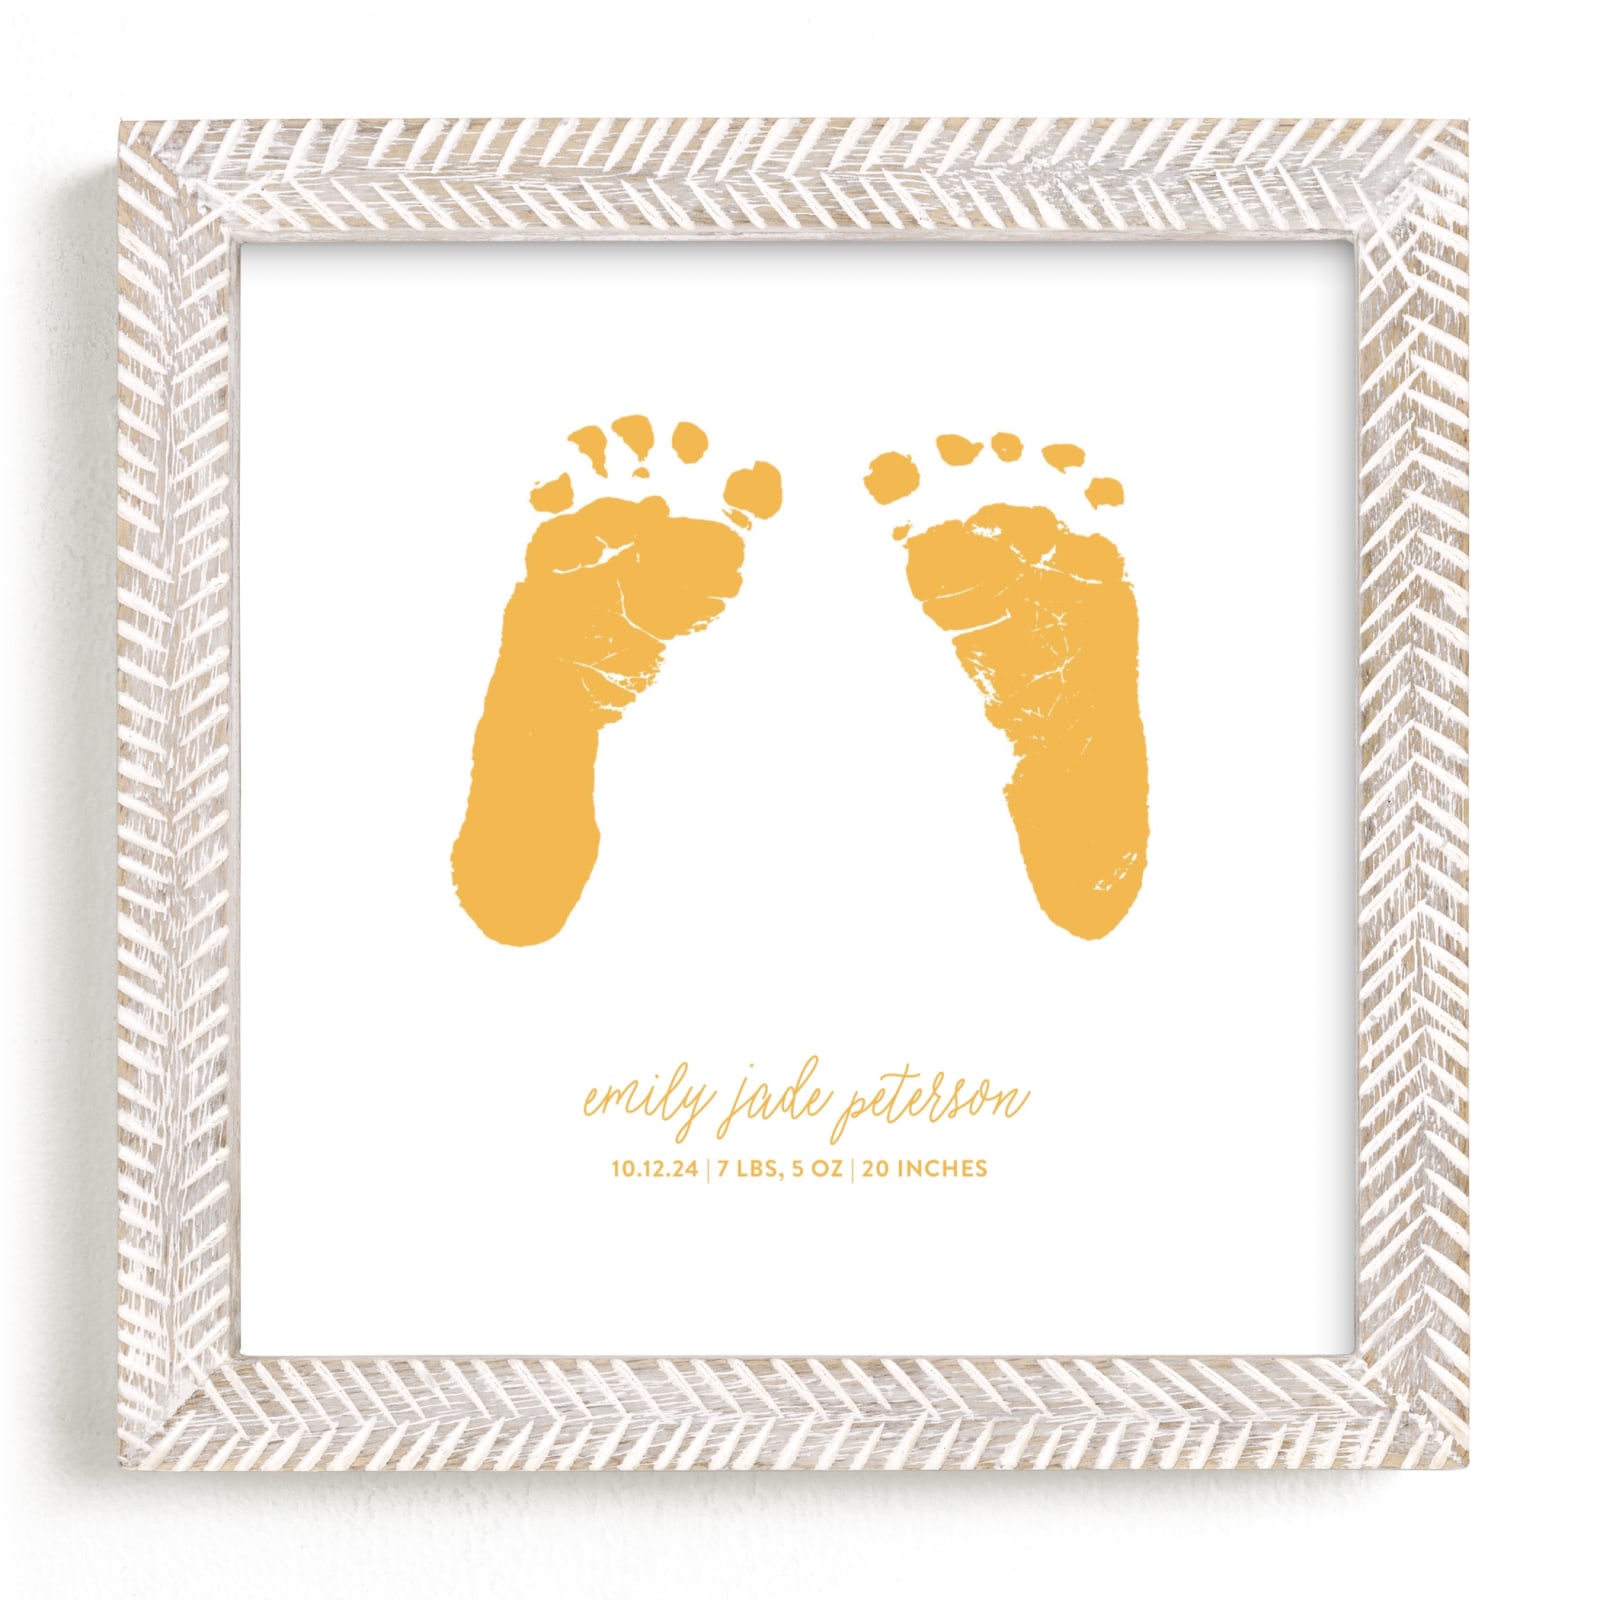 "Custom Footprints Letterpress Art" - Completely Custom Letterpress Art by Minted Custom in beautiful frame options and a variety of sizes.